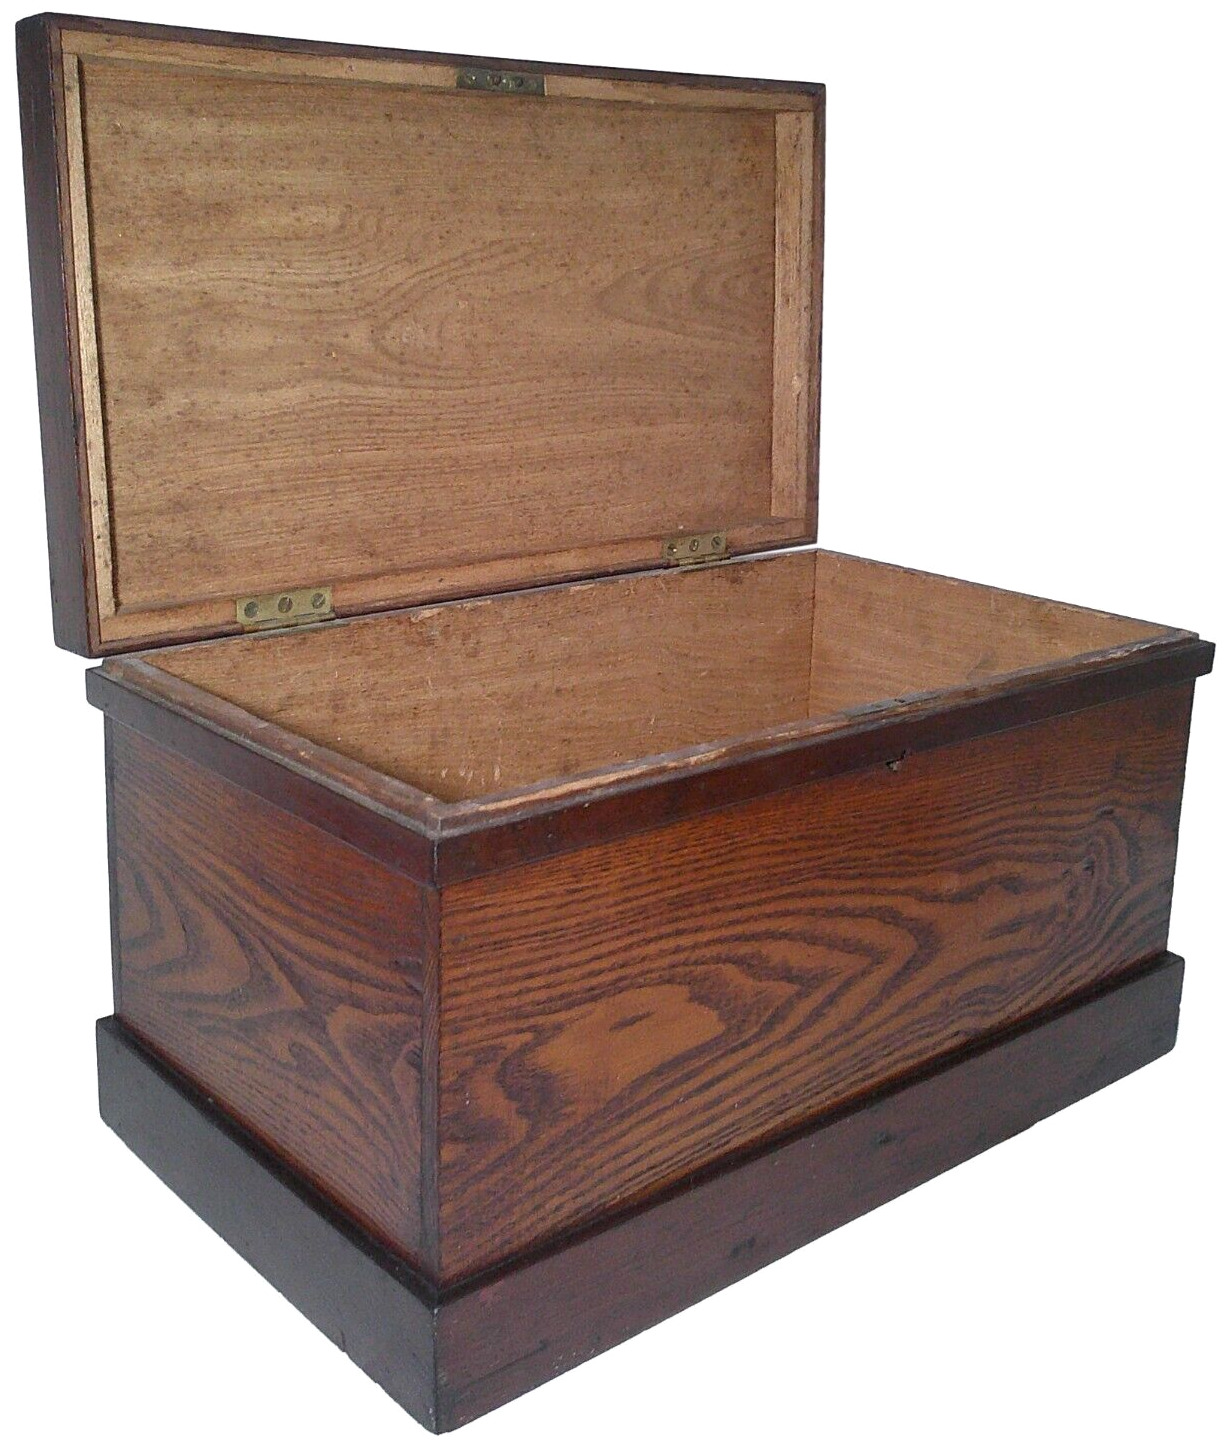 MID-LATE 19TH C NEW ENGLAND PRIMITIVE ANTIQUE LACQUERED OAK WOOD BOX, W/HNGD LID